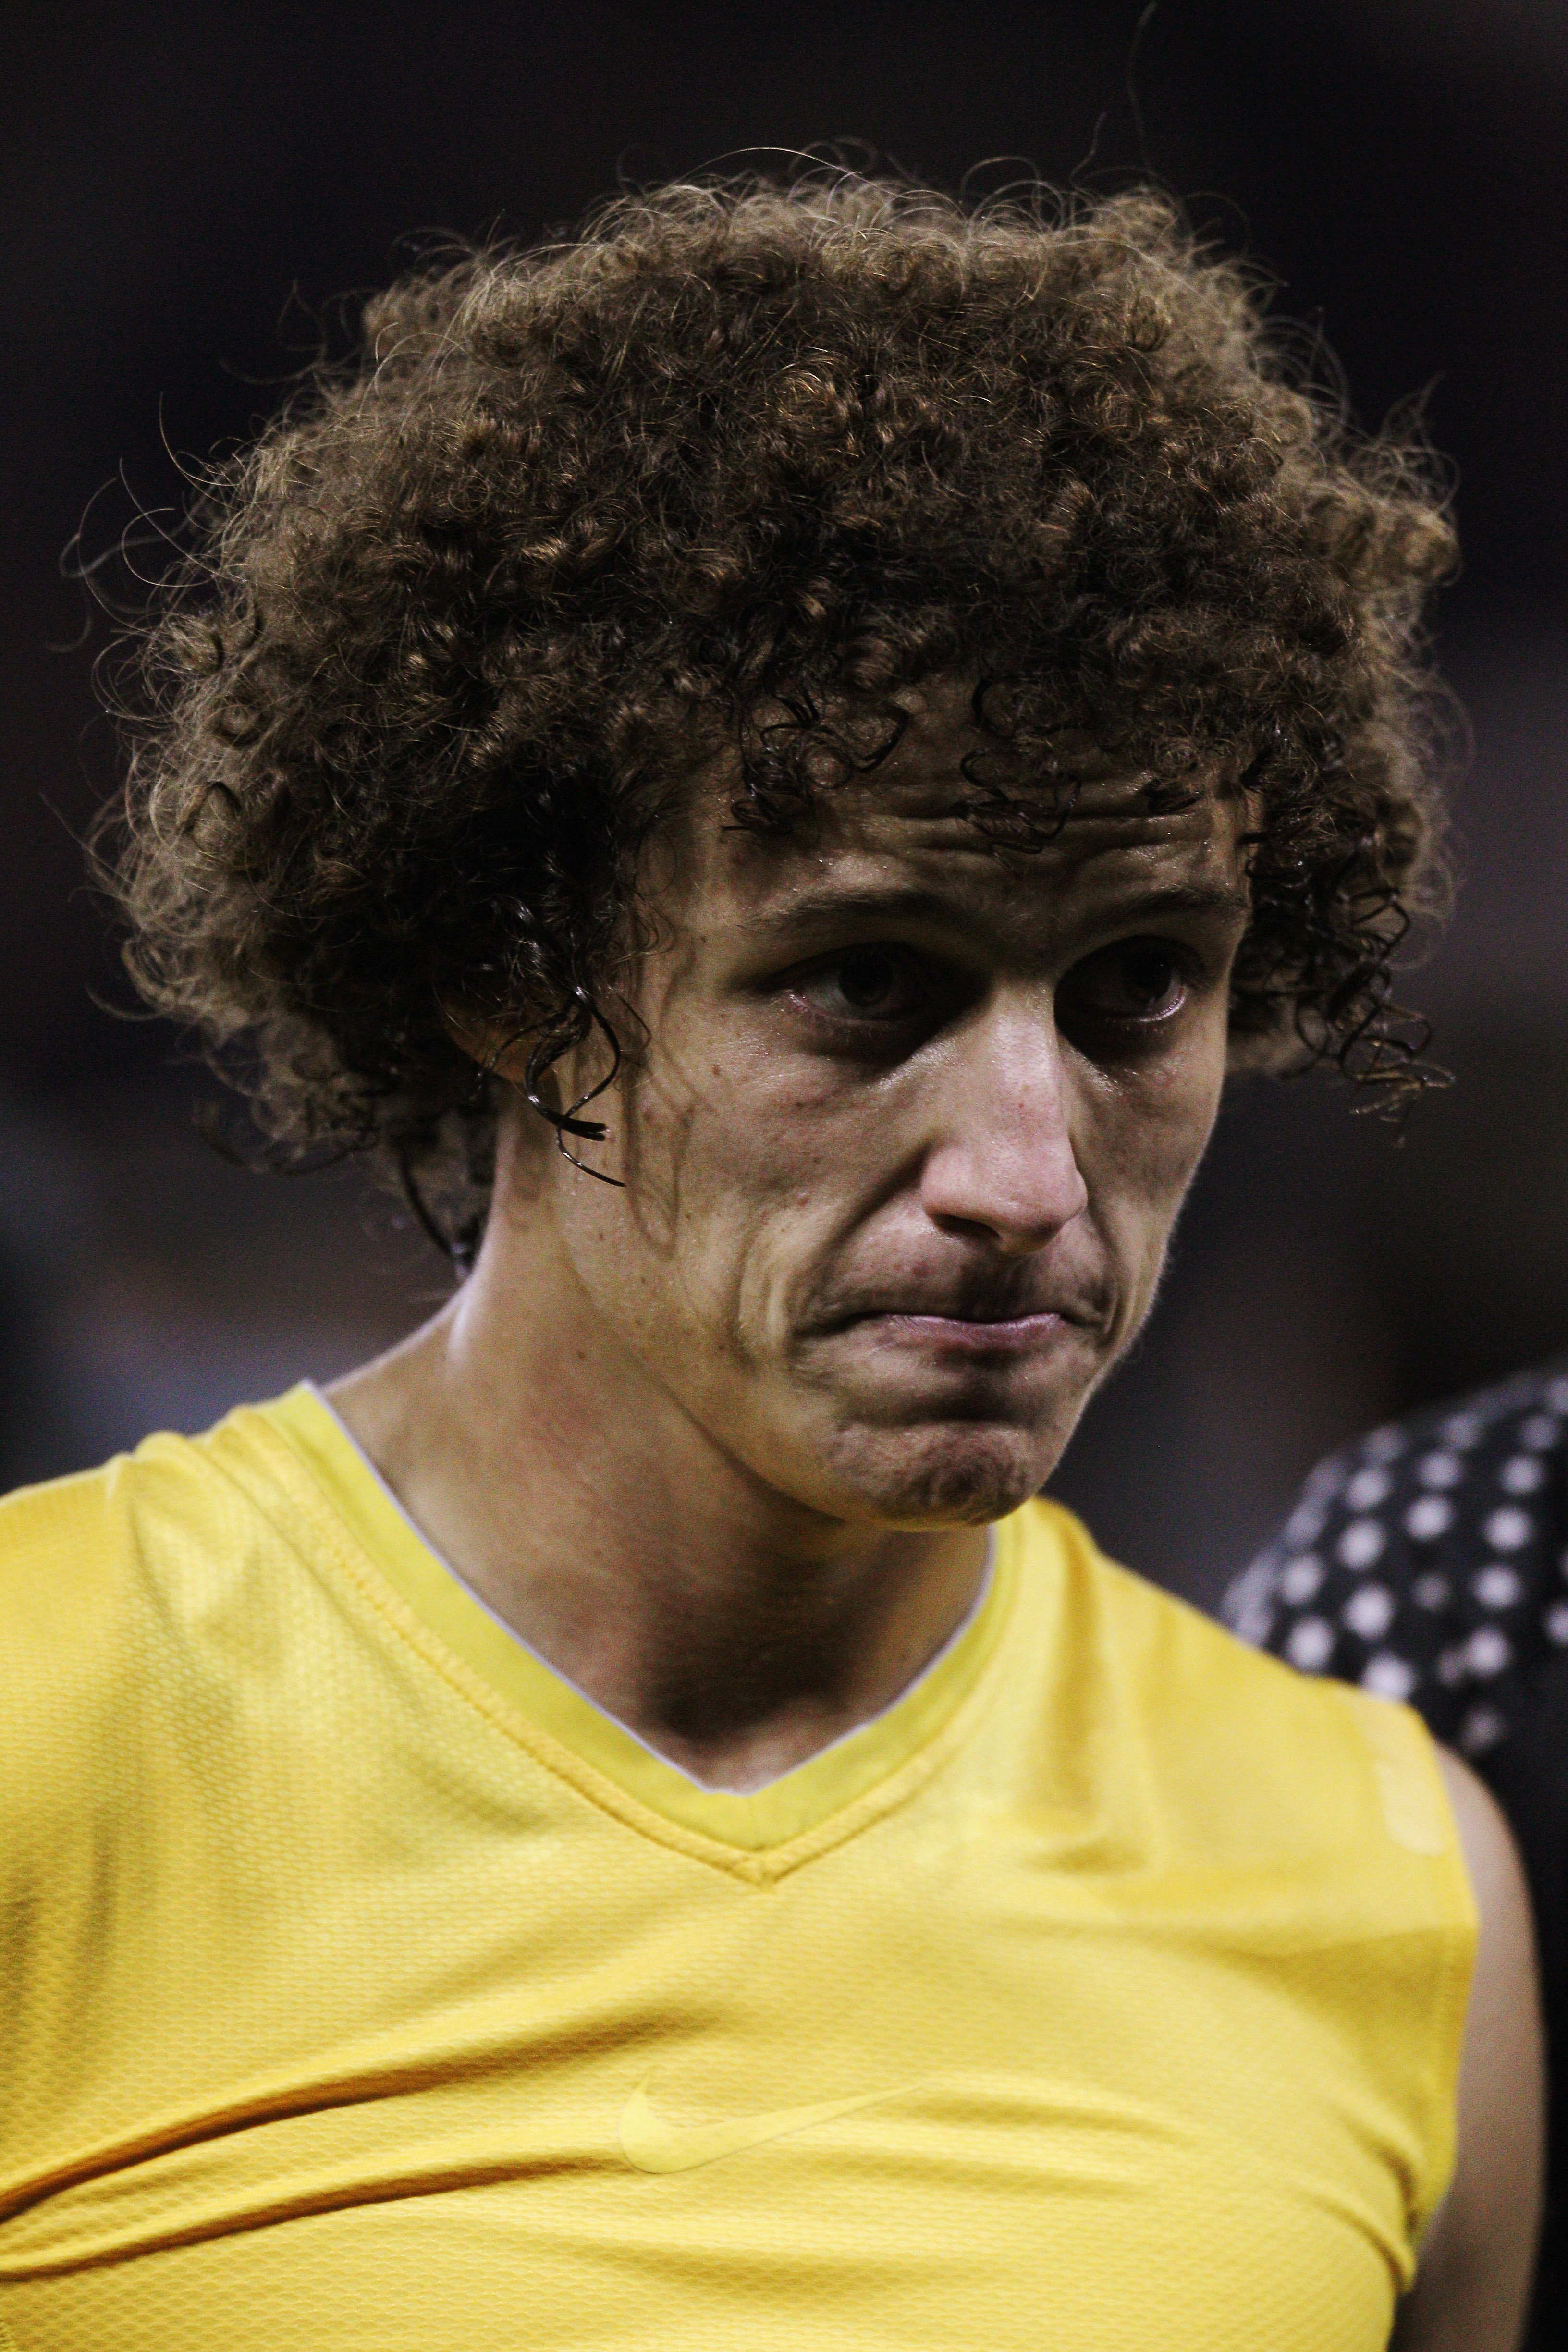 DERBY, ENGLAND - OCTOBER 11:  David Luiz of Brazil  looks on after the International Friendly match between Brazil and Ukraine at Pride Park Stadium on October 11, 2010 in Derby, England.  (Photo by Dean Mouhtaropoulos/Getty Images)